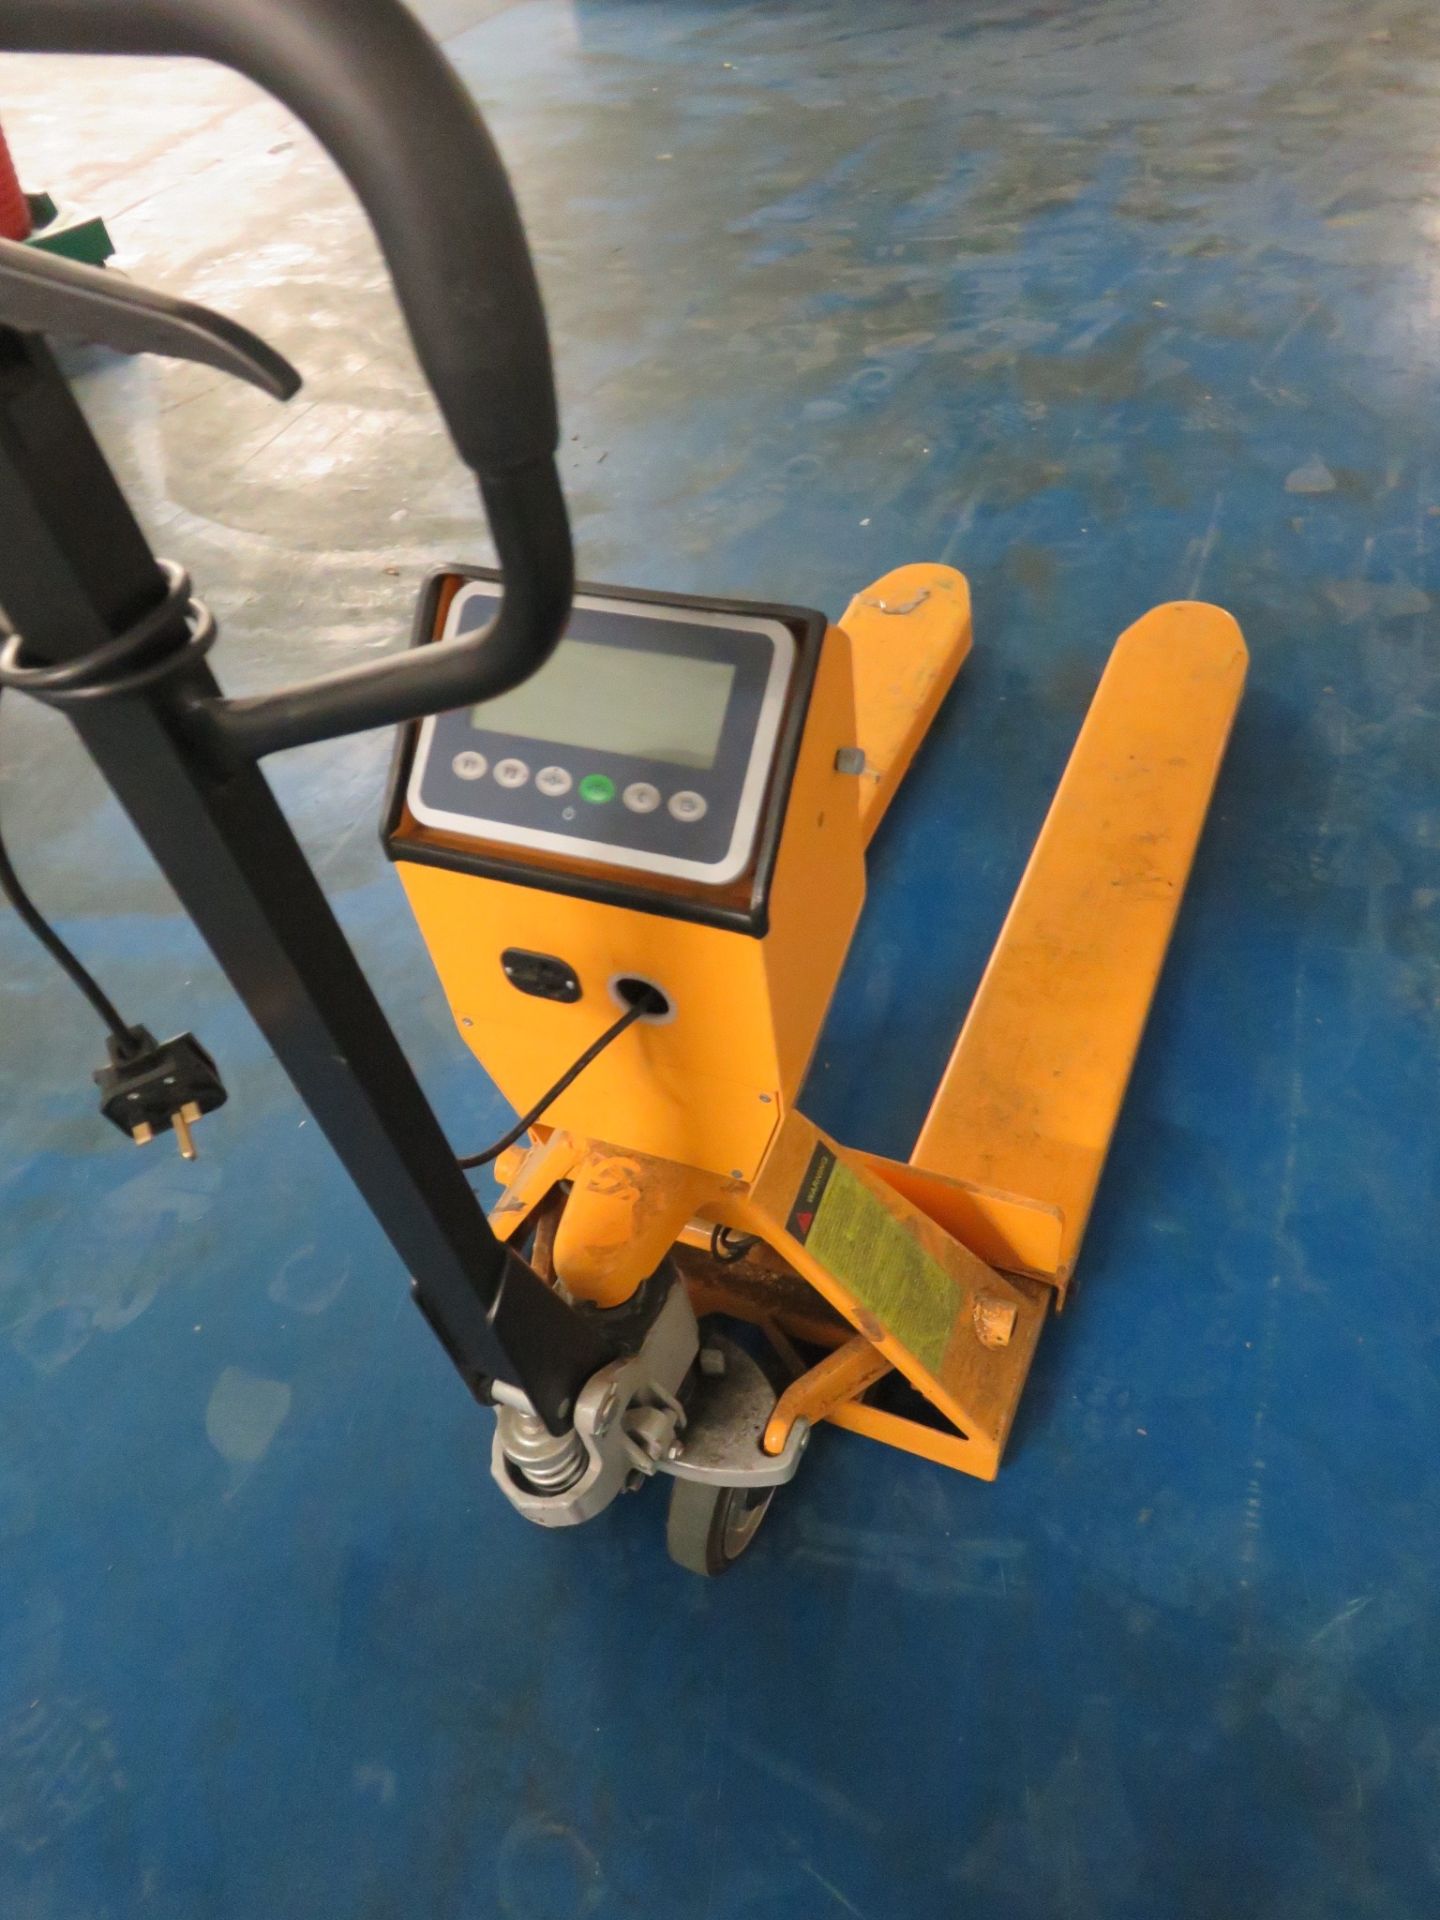 1 x Pallet Truck weighing scale electric, 2,000 KG. LO £10 - Image 2 of 2